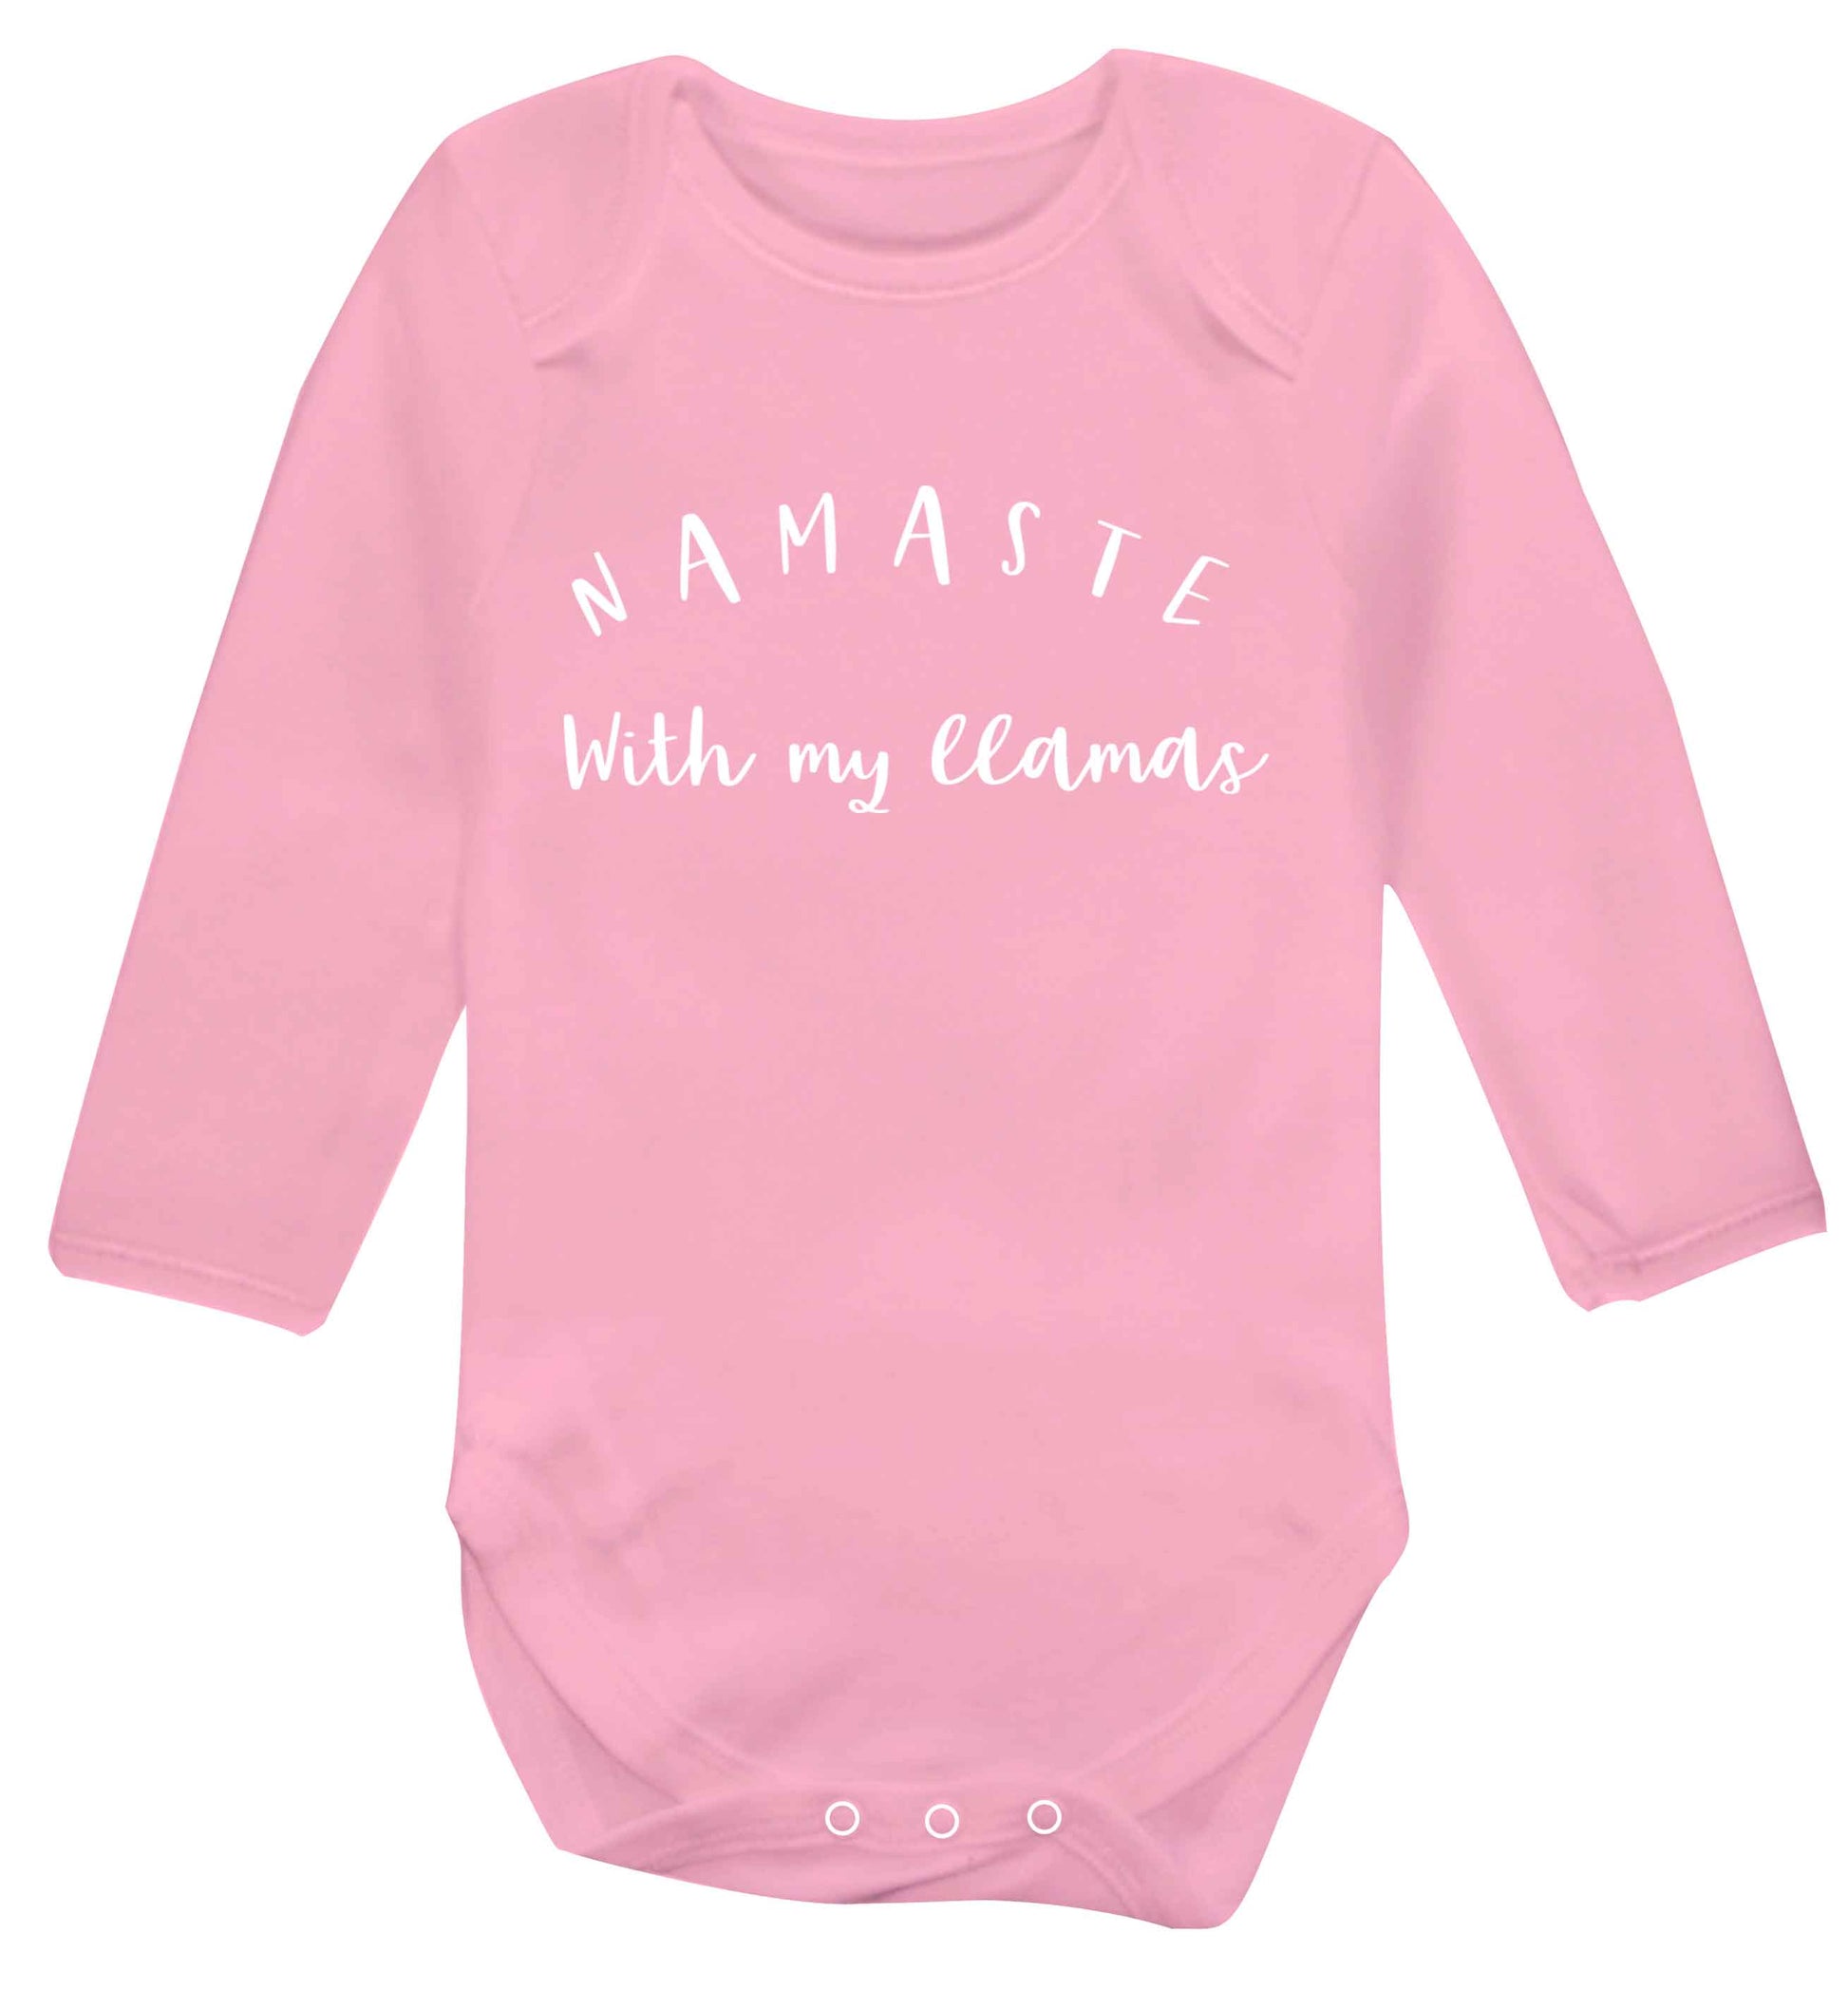 Namaste with my llamas Baby Vest long sleeved pale pink 6-12 months